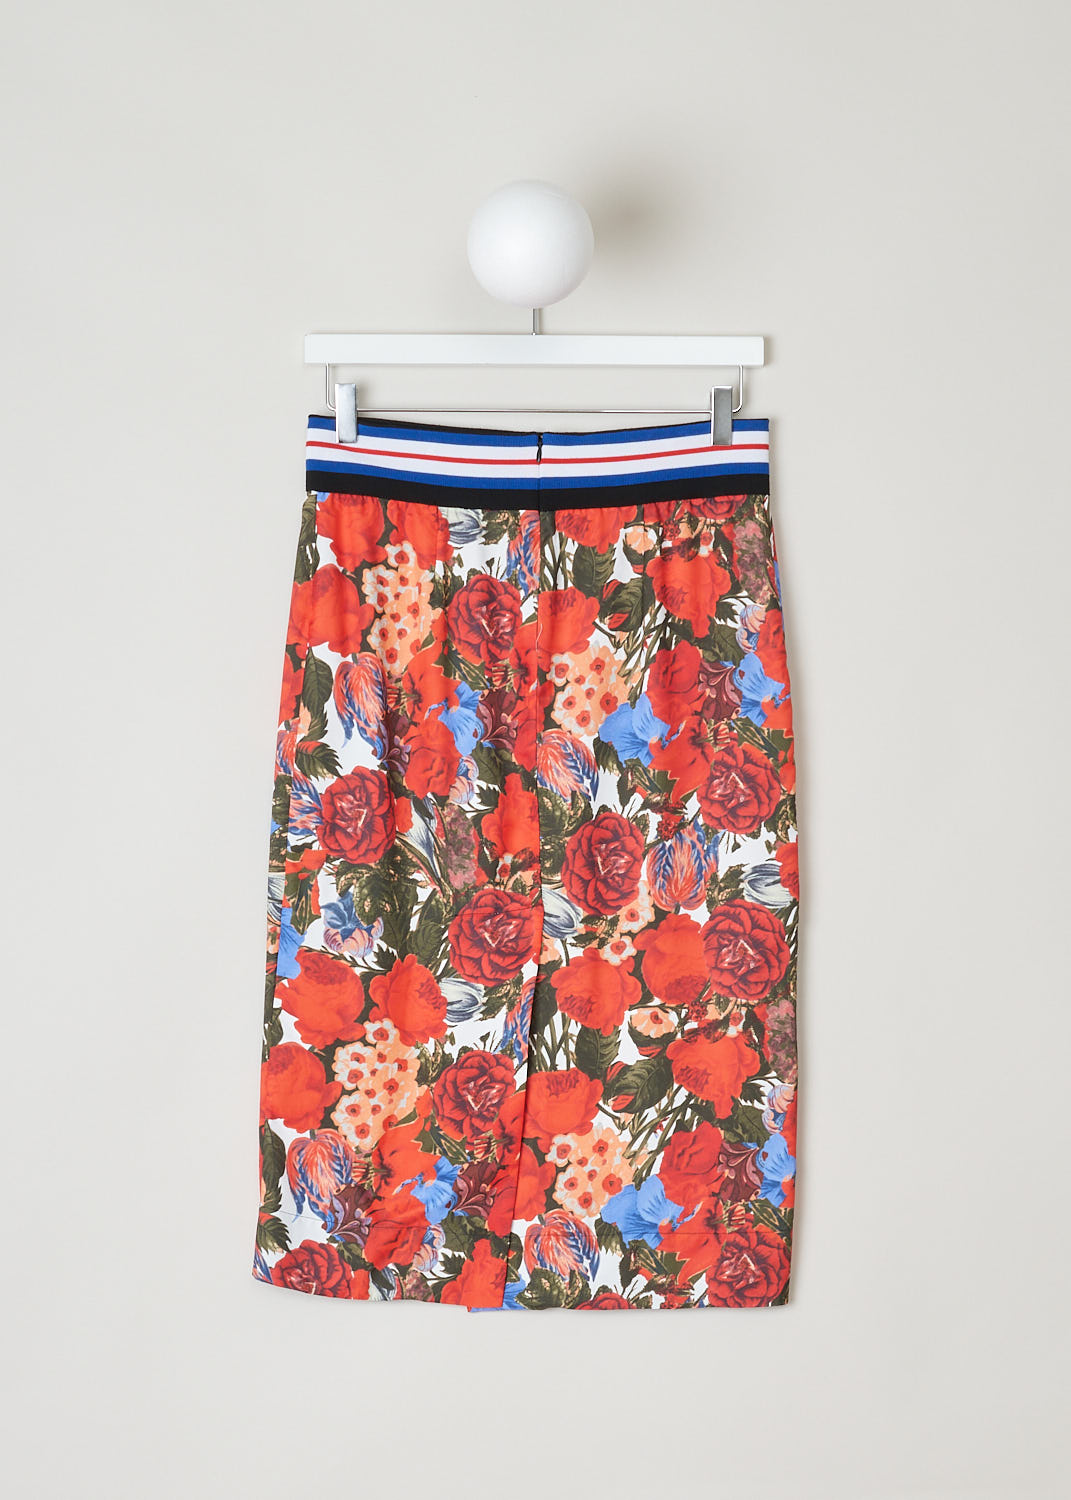 MARNI, PENCIL SKIRT ADORNED WITH A RED FLORAL MOTIF, GOMAP26LO0_TV677_DUR66, Red, Print, Back, This pencil skirt comes decorated with a cheerful floral print in reds and blues. Made with a broad elastic waistband for maximum comfort. The fastening option here comes in the form of a concealed zipper and is found on the back. Also found on the back is the split, going up a third of the way. 